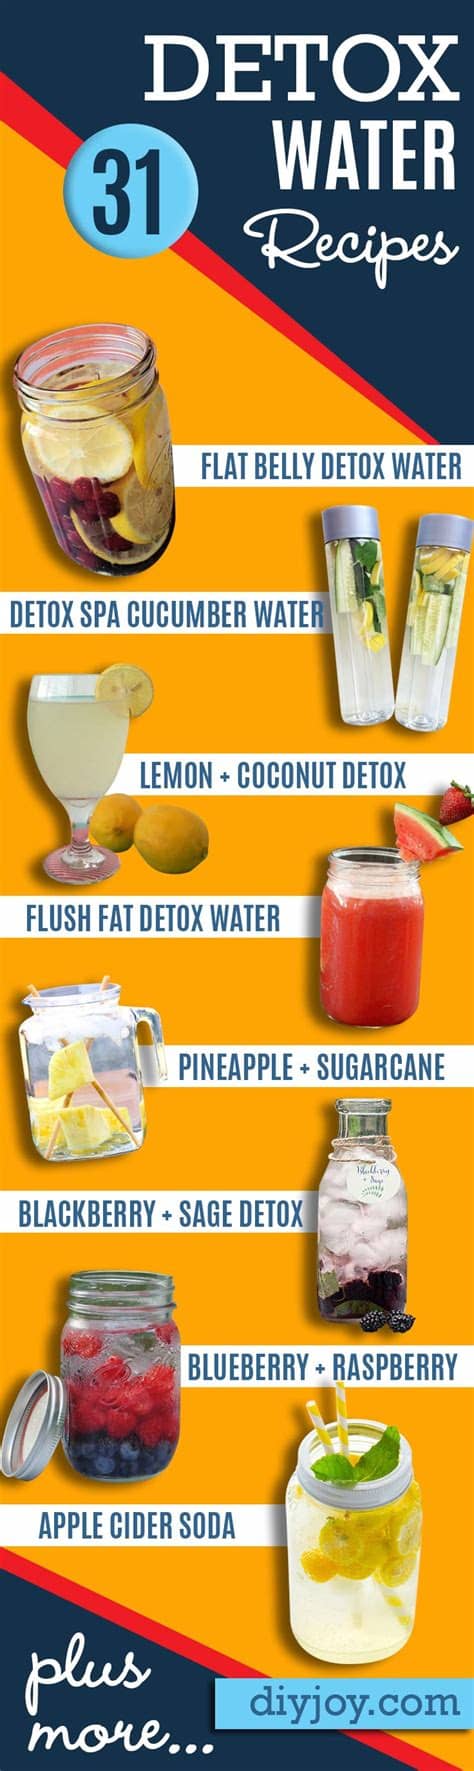 Smoothies health drink healthy drinks smoothie drinks juicer recipes healthy juice recipes juicy juice juicing for health smoothie recipes · juice cleanse recipes are a great way to lose weight fast. 31 DIY DETOX Water Recipes - Drinks To Start Off 2016 Right!